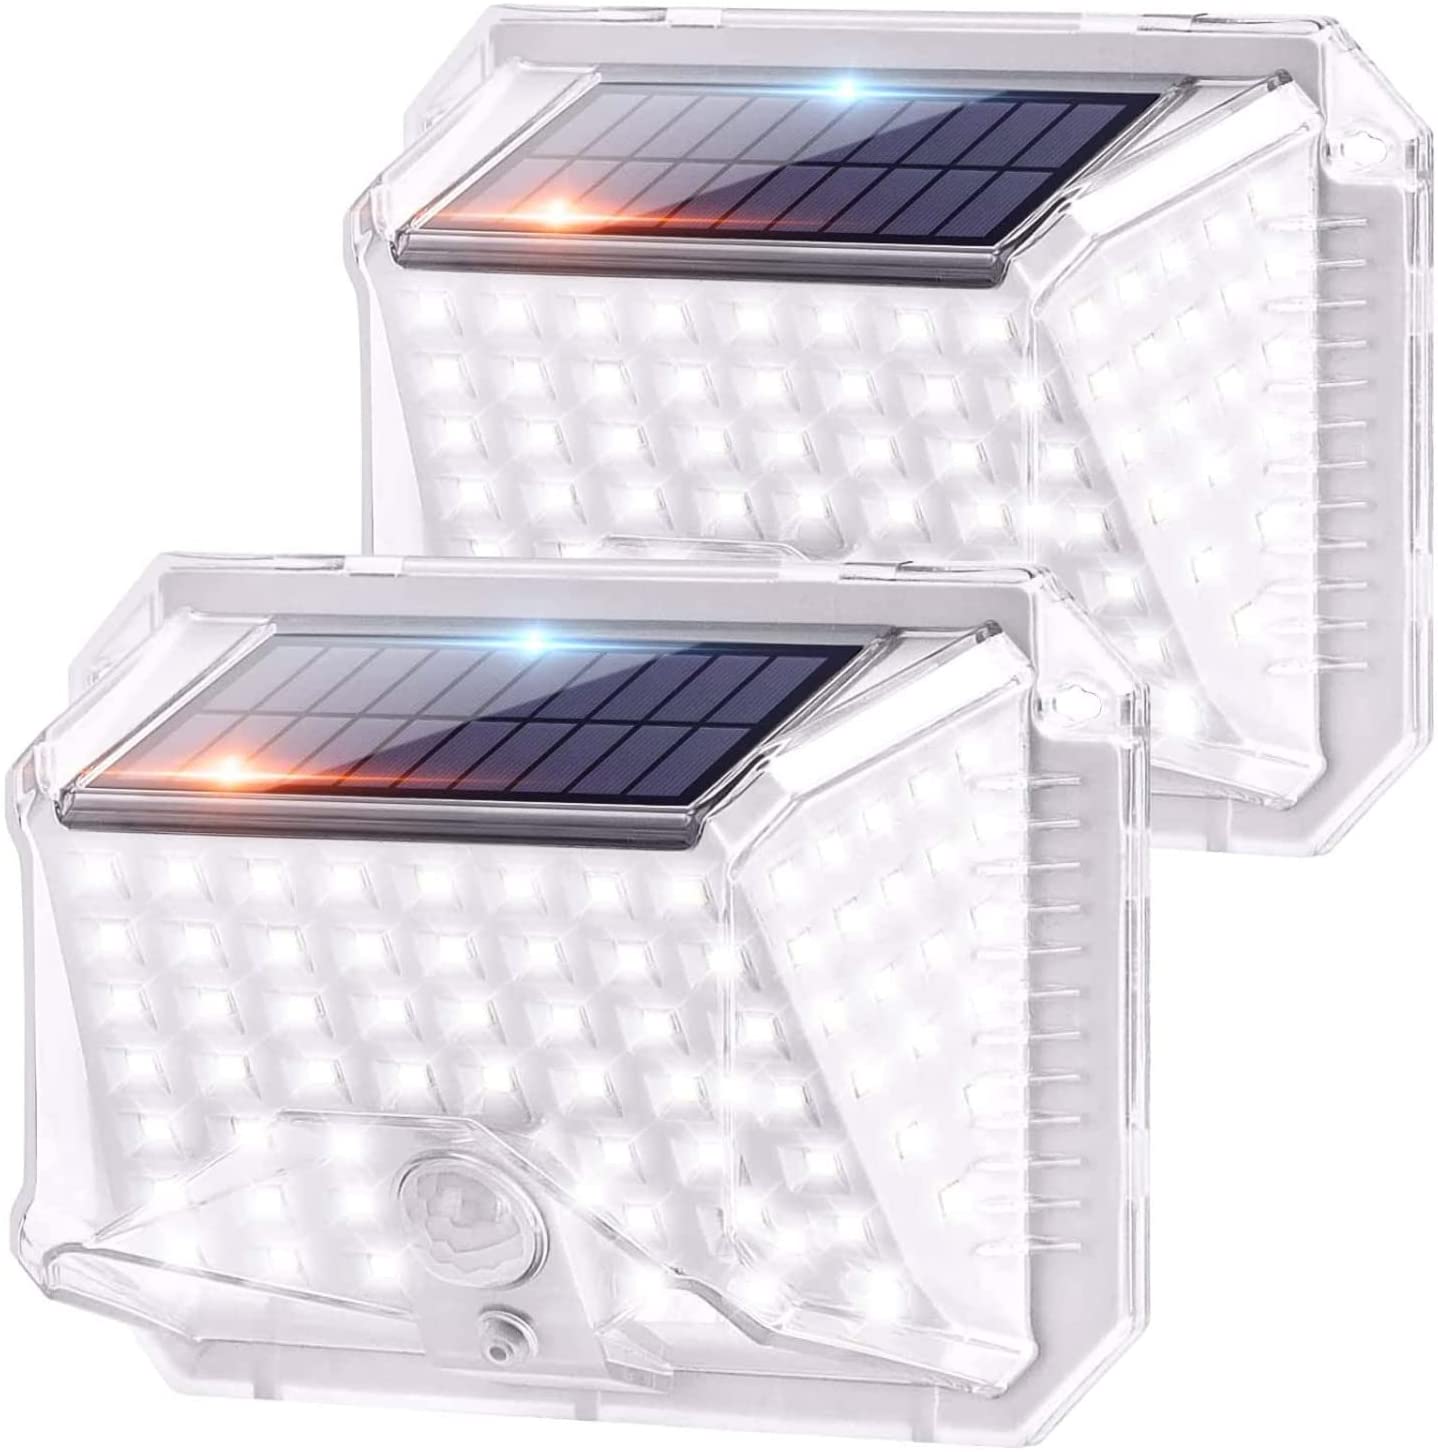 2 Pack Outdoor Solar Lights W/ Wireless Motion Sensor $15.39 + Delivery(free w/ prime)